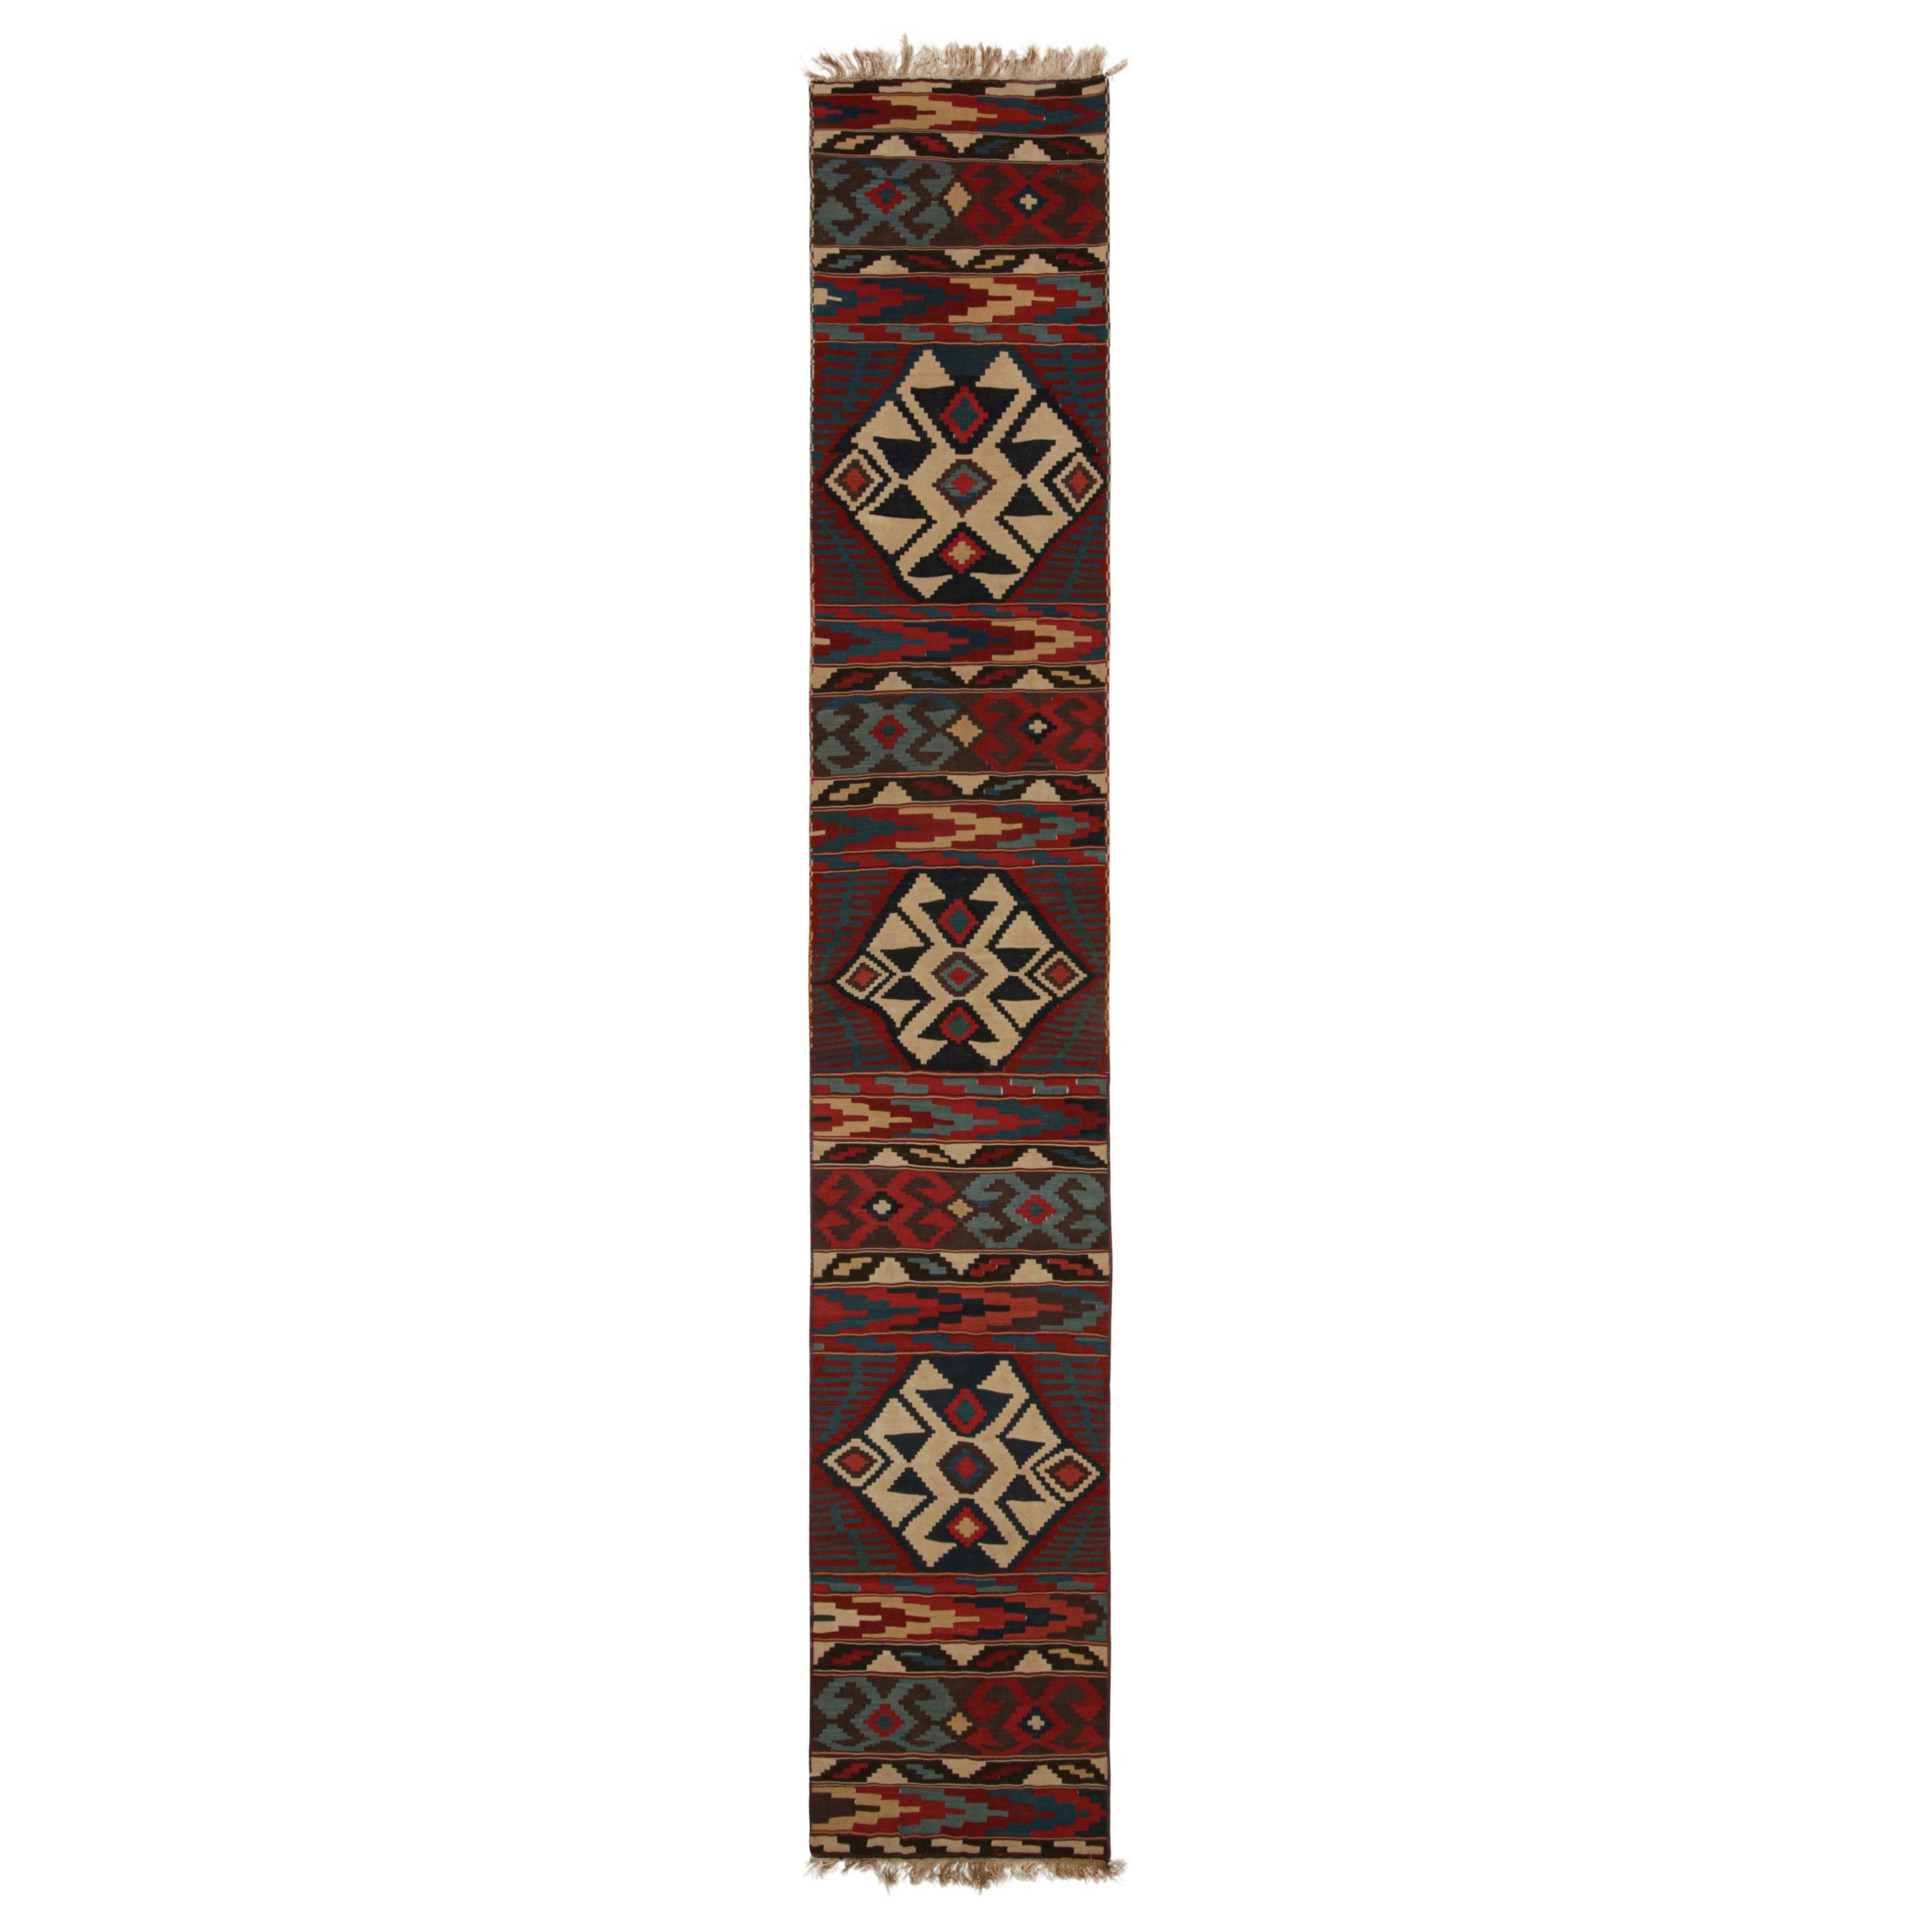 Twin Vintage Persian Kilim Runner Rugs with Geometric Patterns, from Rug & Kilim For Sale